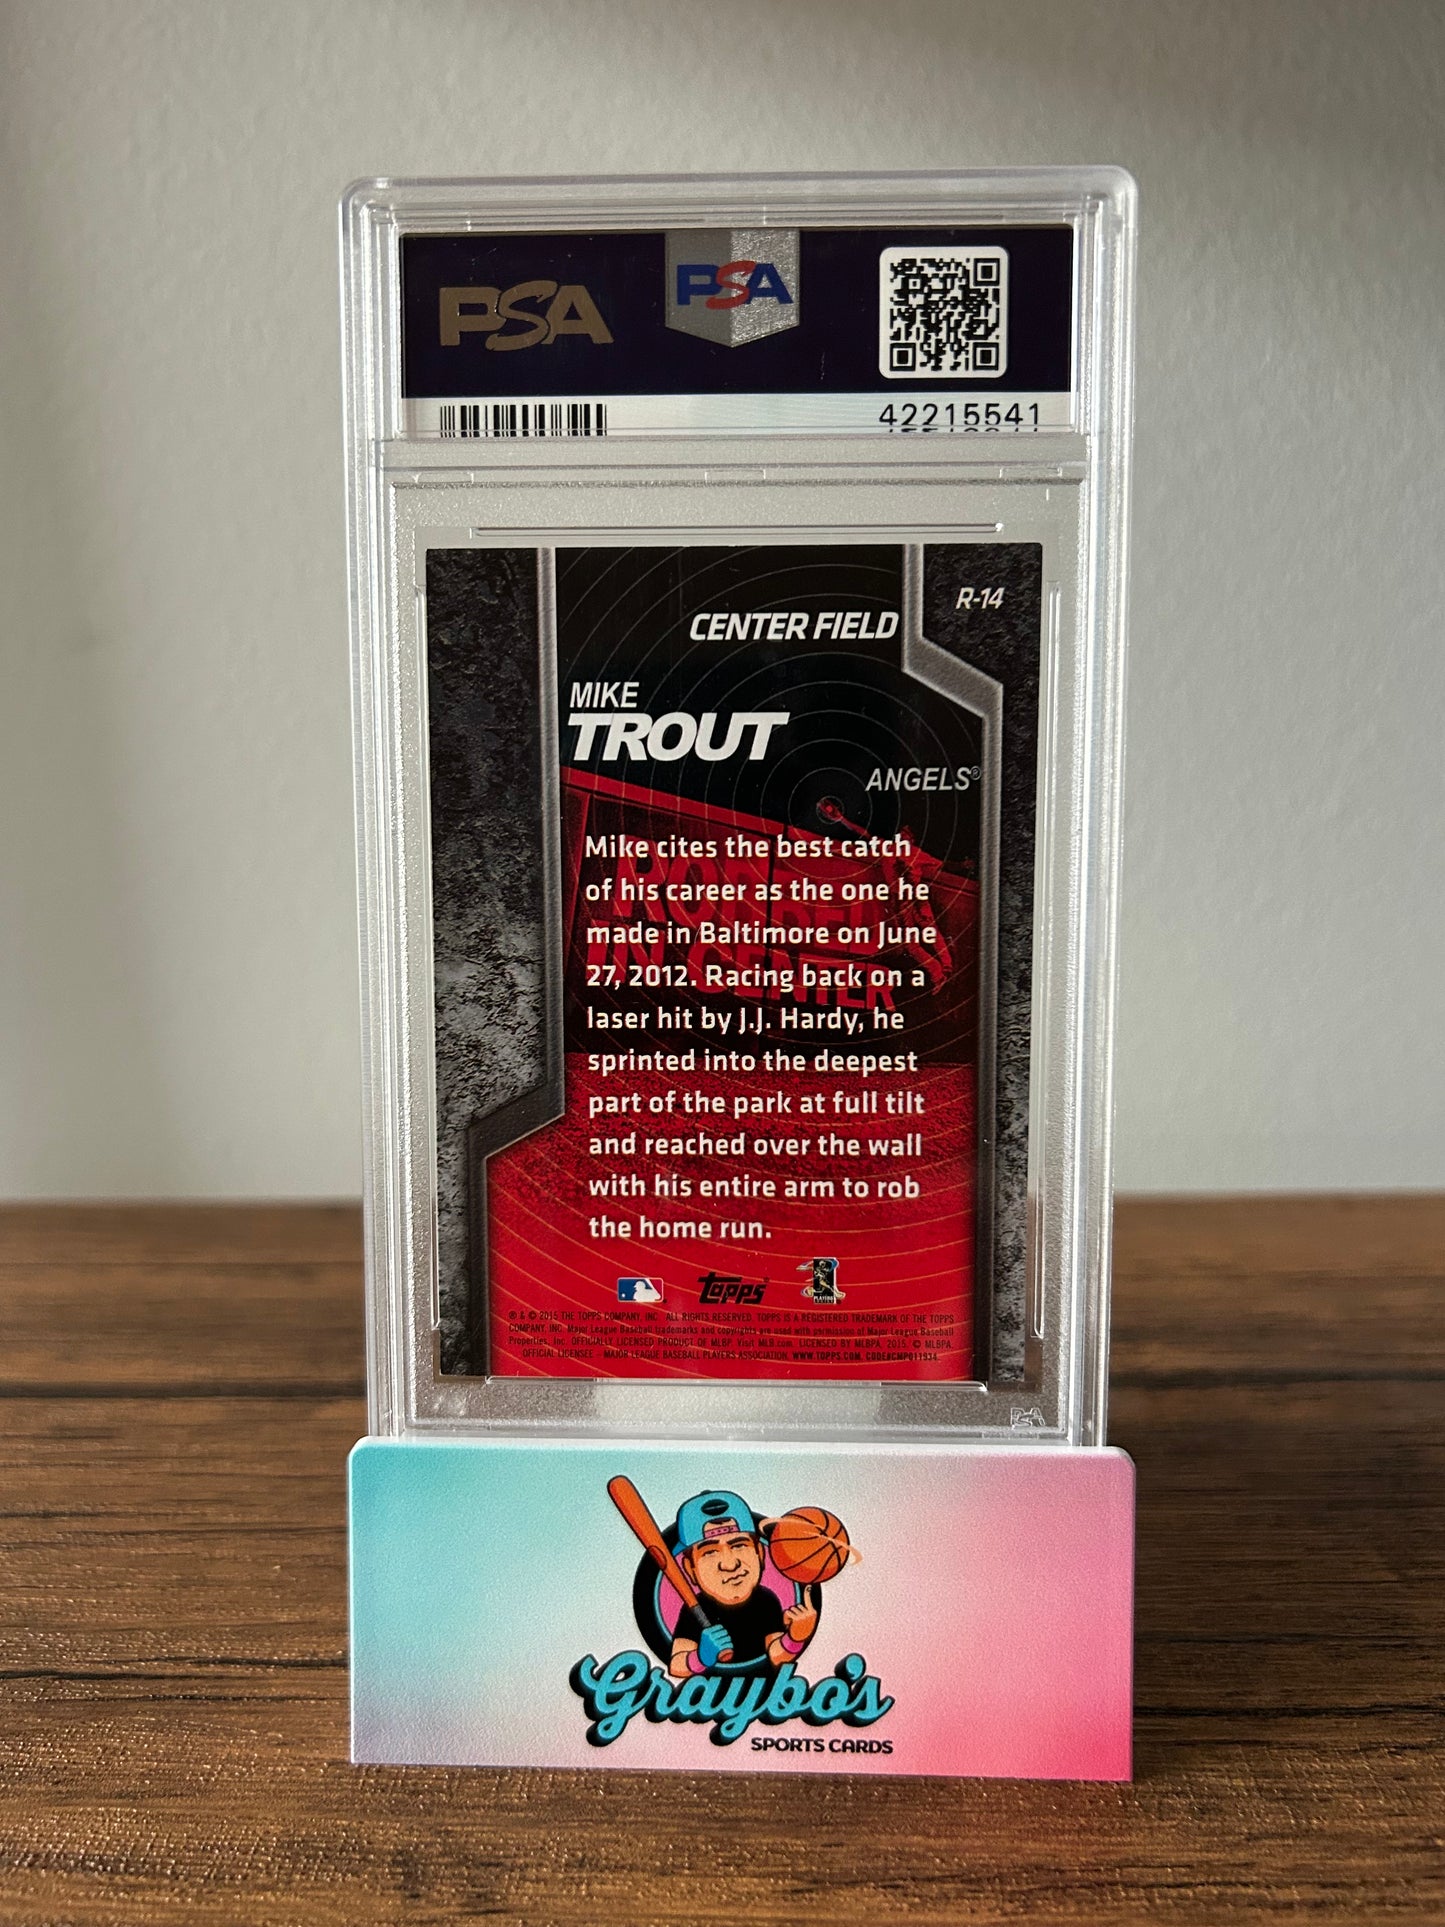 2018 Topps Arch. Sig. Ser. Mike Trout Actv. PL. ED. '15 TPS. RBD 1/1 #R-14 PSA 7